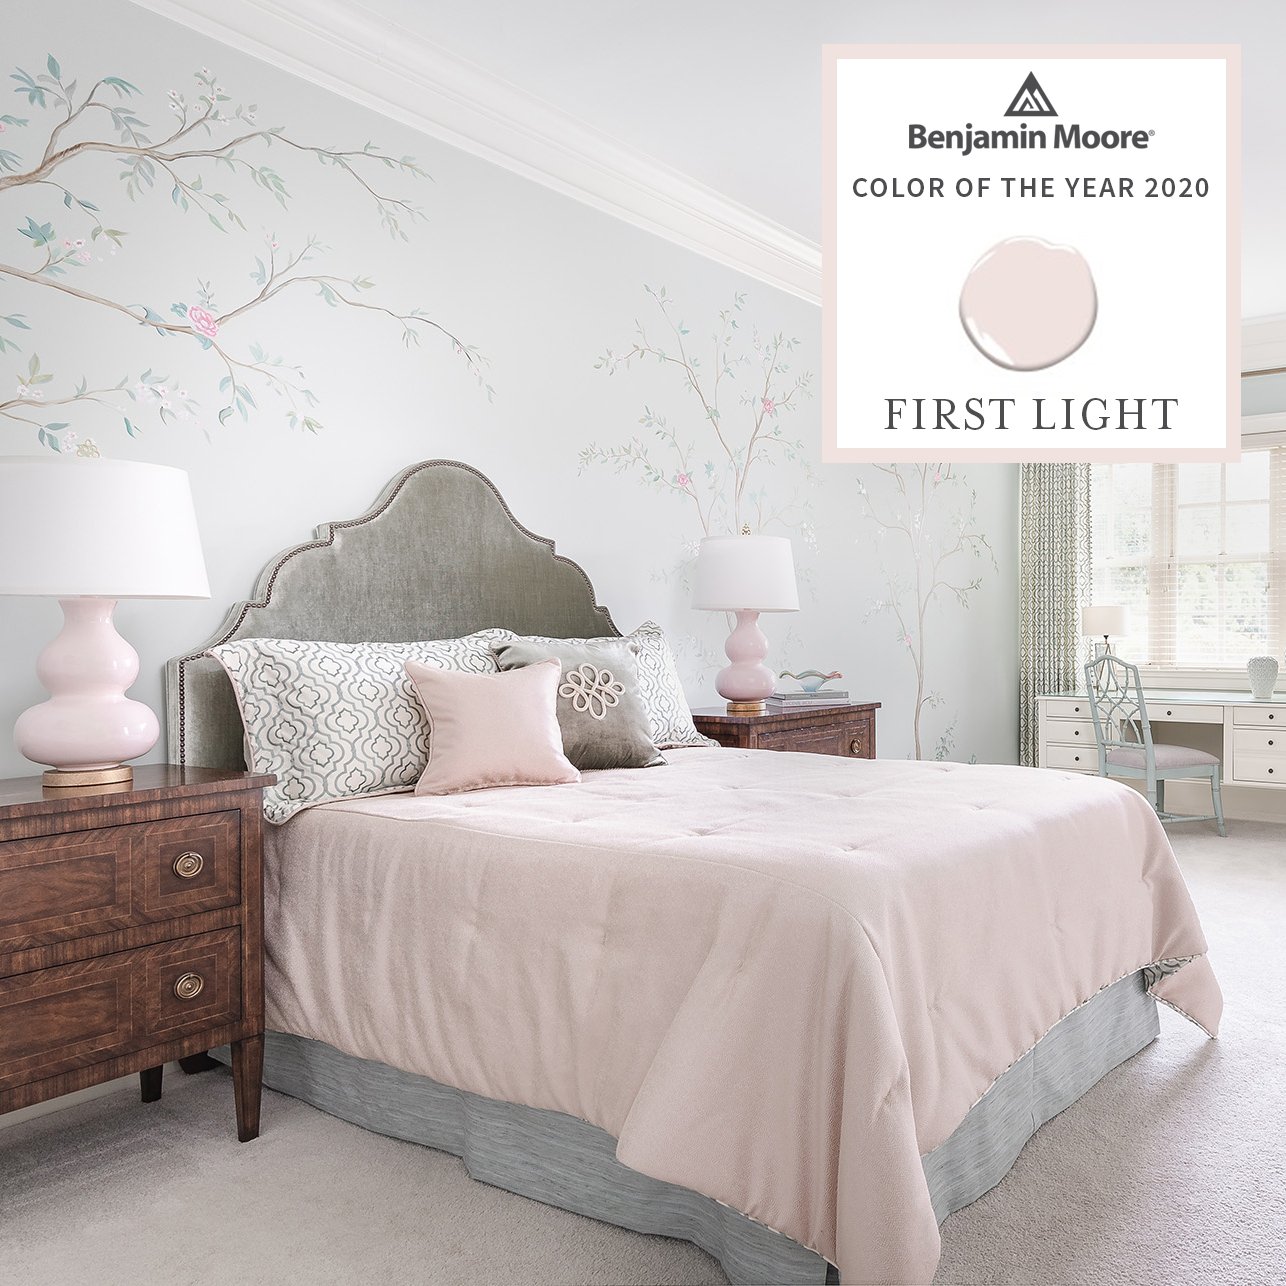 Decorating Den Interiors ar Twitter: "Benjamin Moore announced their 2020 Color of the First Light. A refreshing alternative to white or beige, First Light is a soft, airy pink that flatters